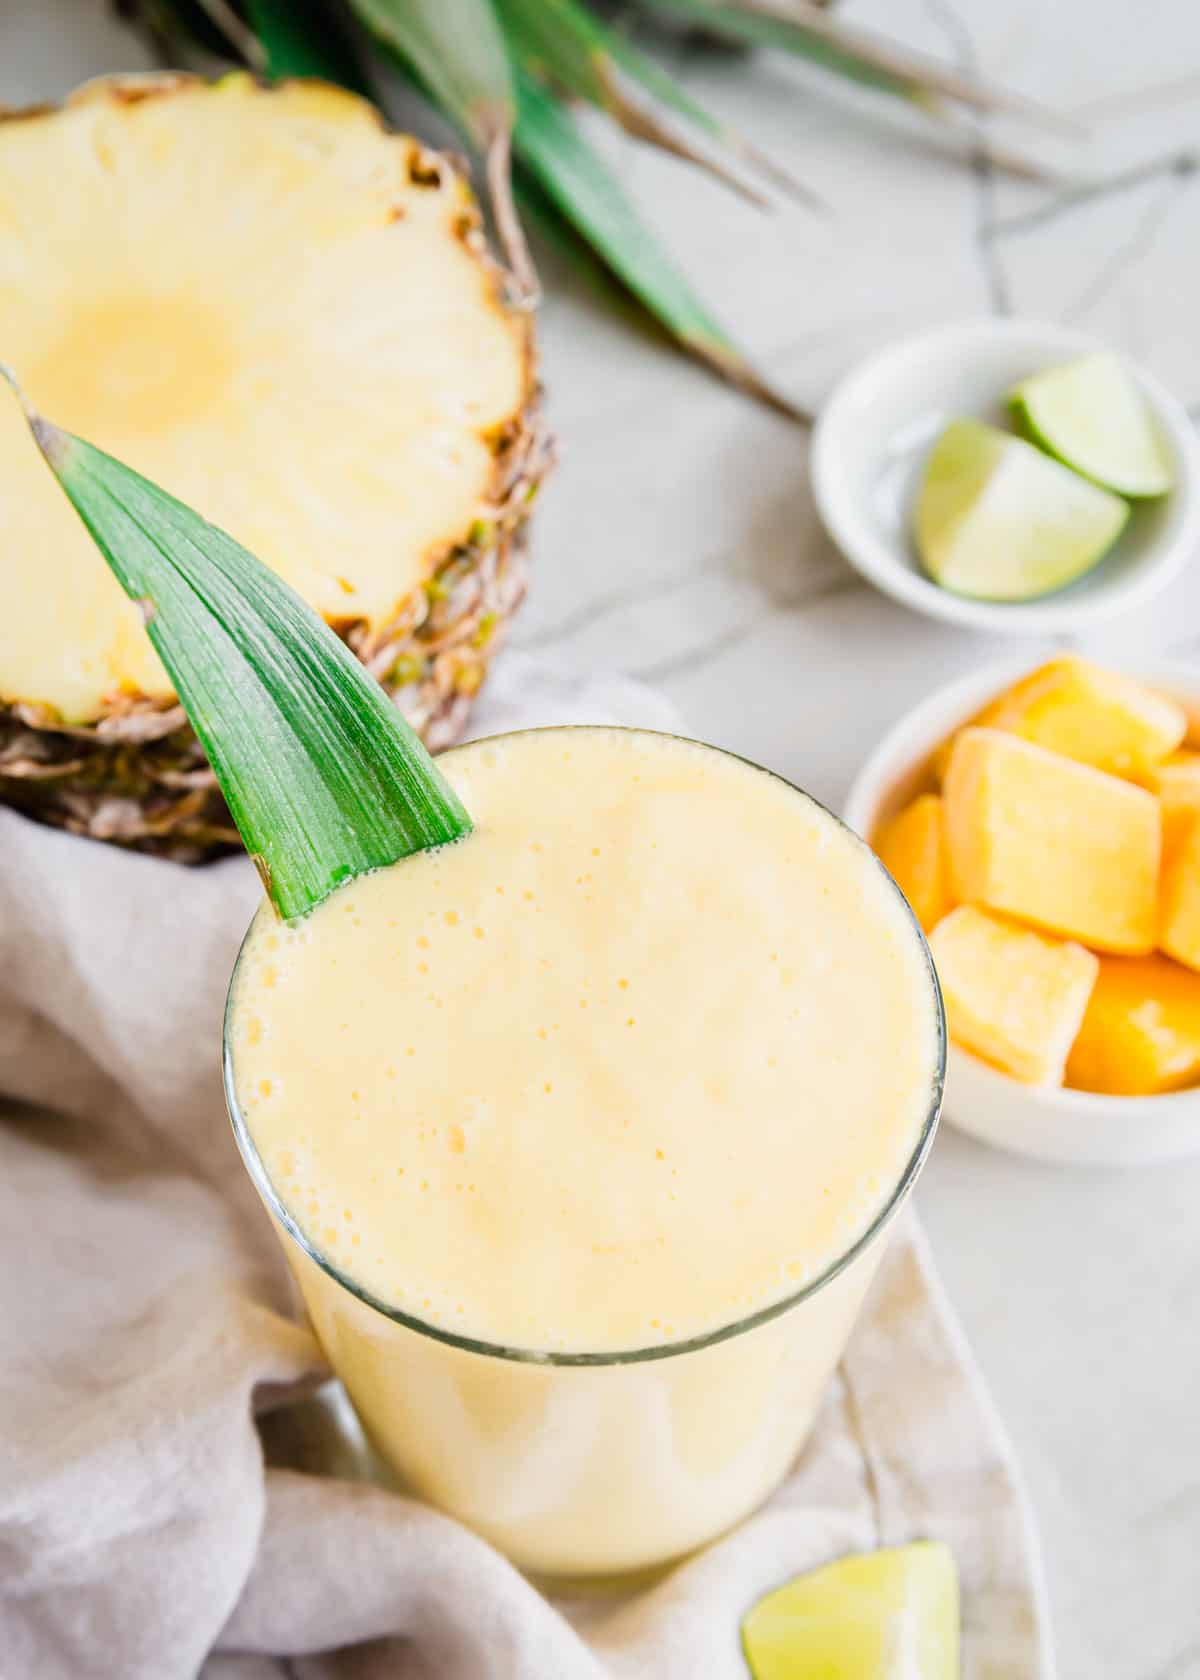 Mango pineapple yogurt smoothie in a glass garnished with a pineapple leaf.